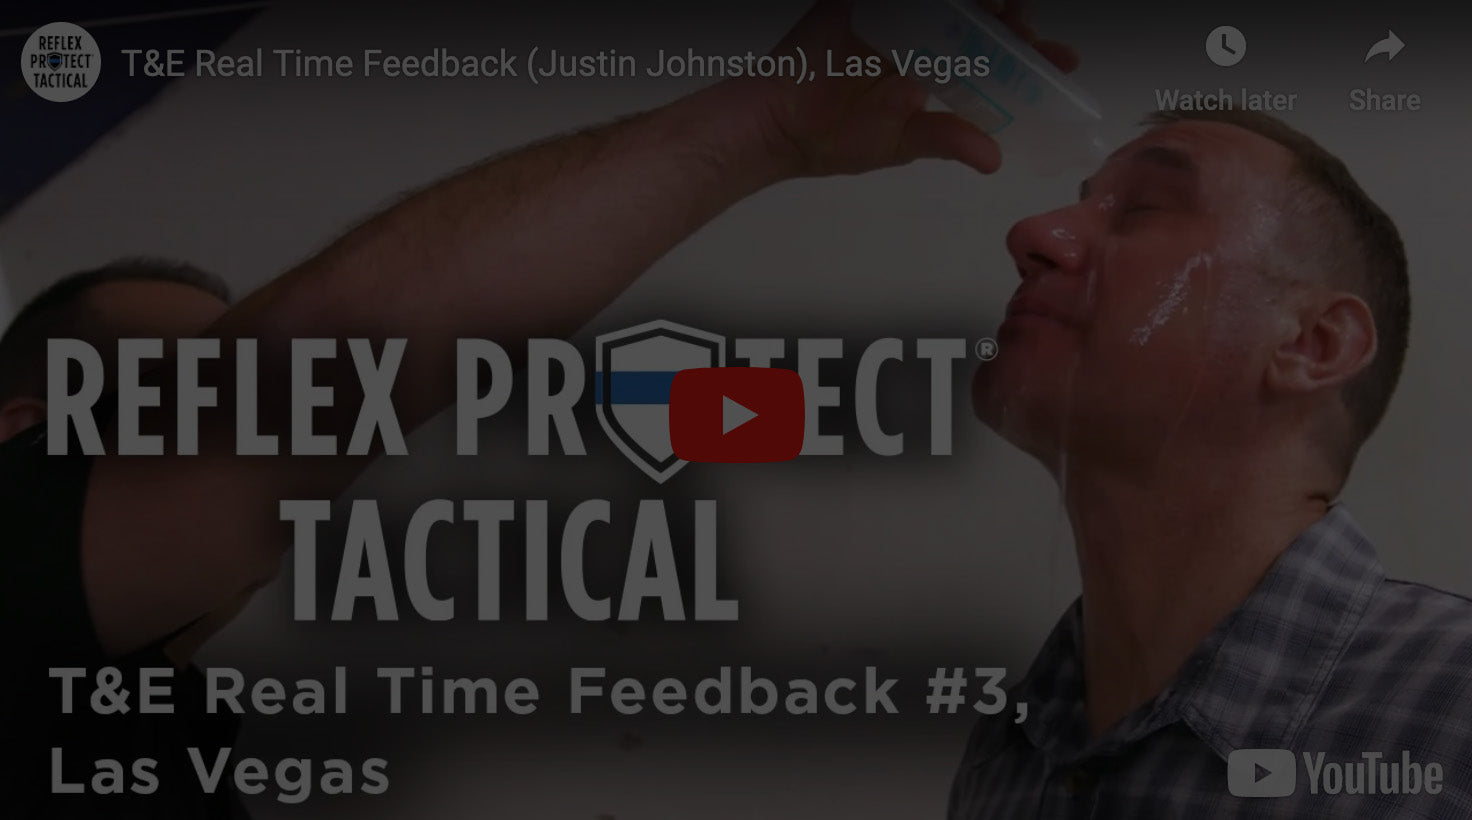 Hear What The Pros are Saying About Reflex Protect Tactical (Justin Johnson)